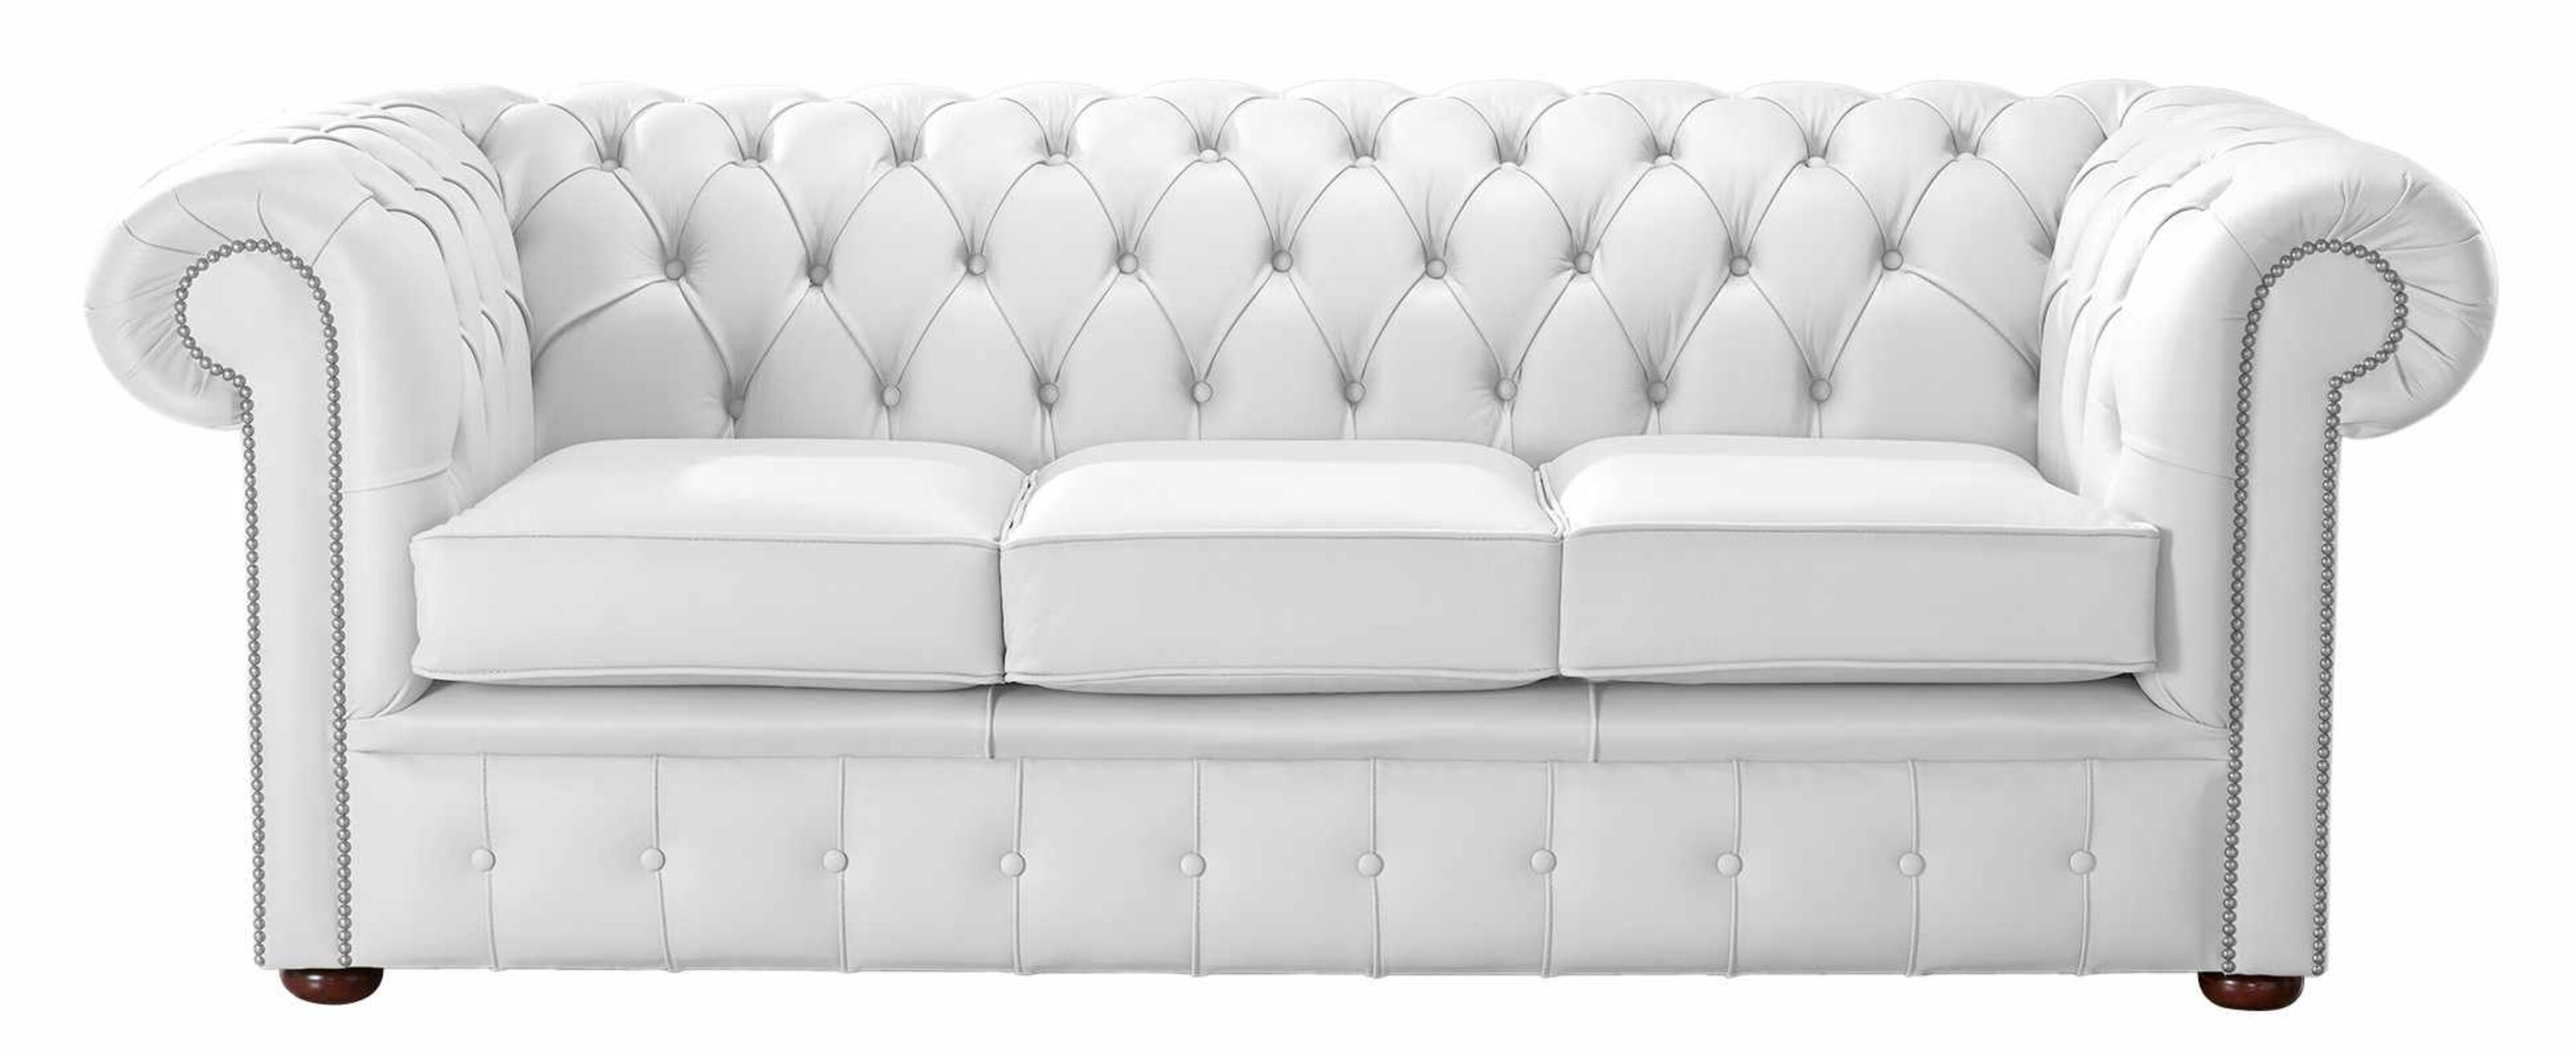 Artisanal Mastery The Birthplace and Craftsmanship of Chesterfield Sofas  %Post Title